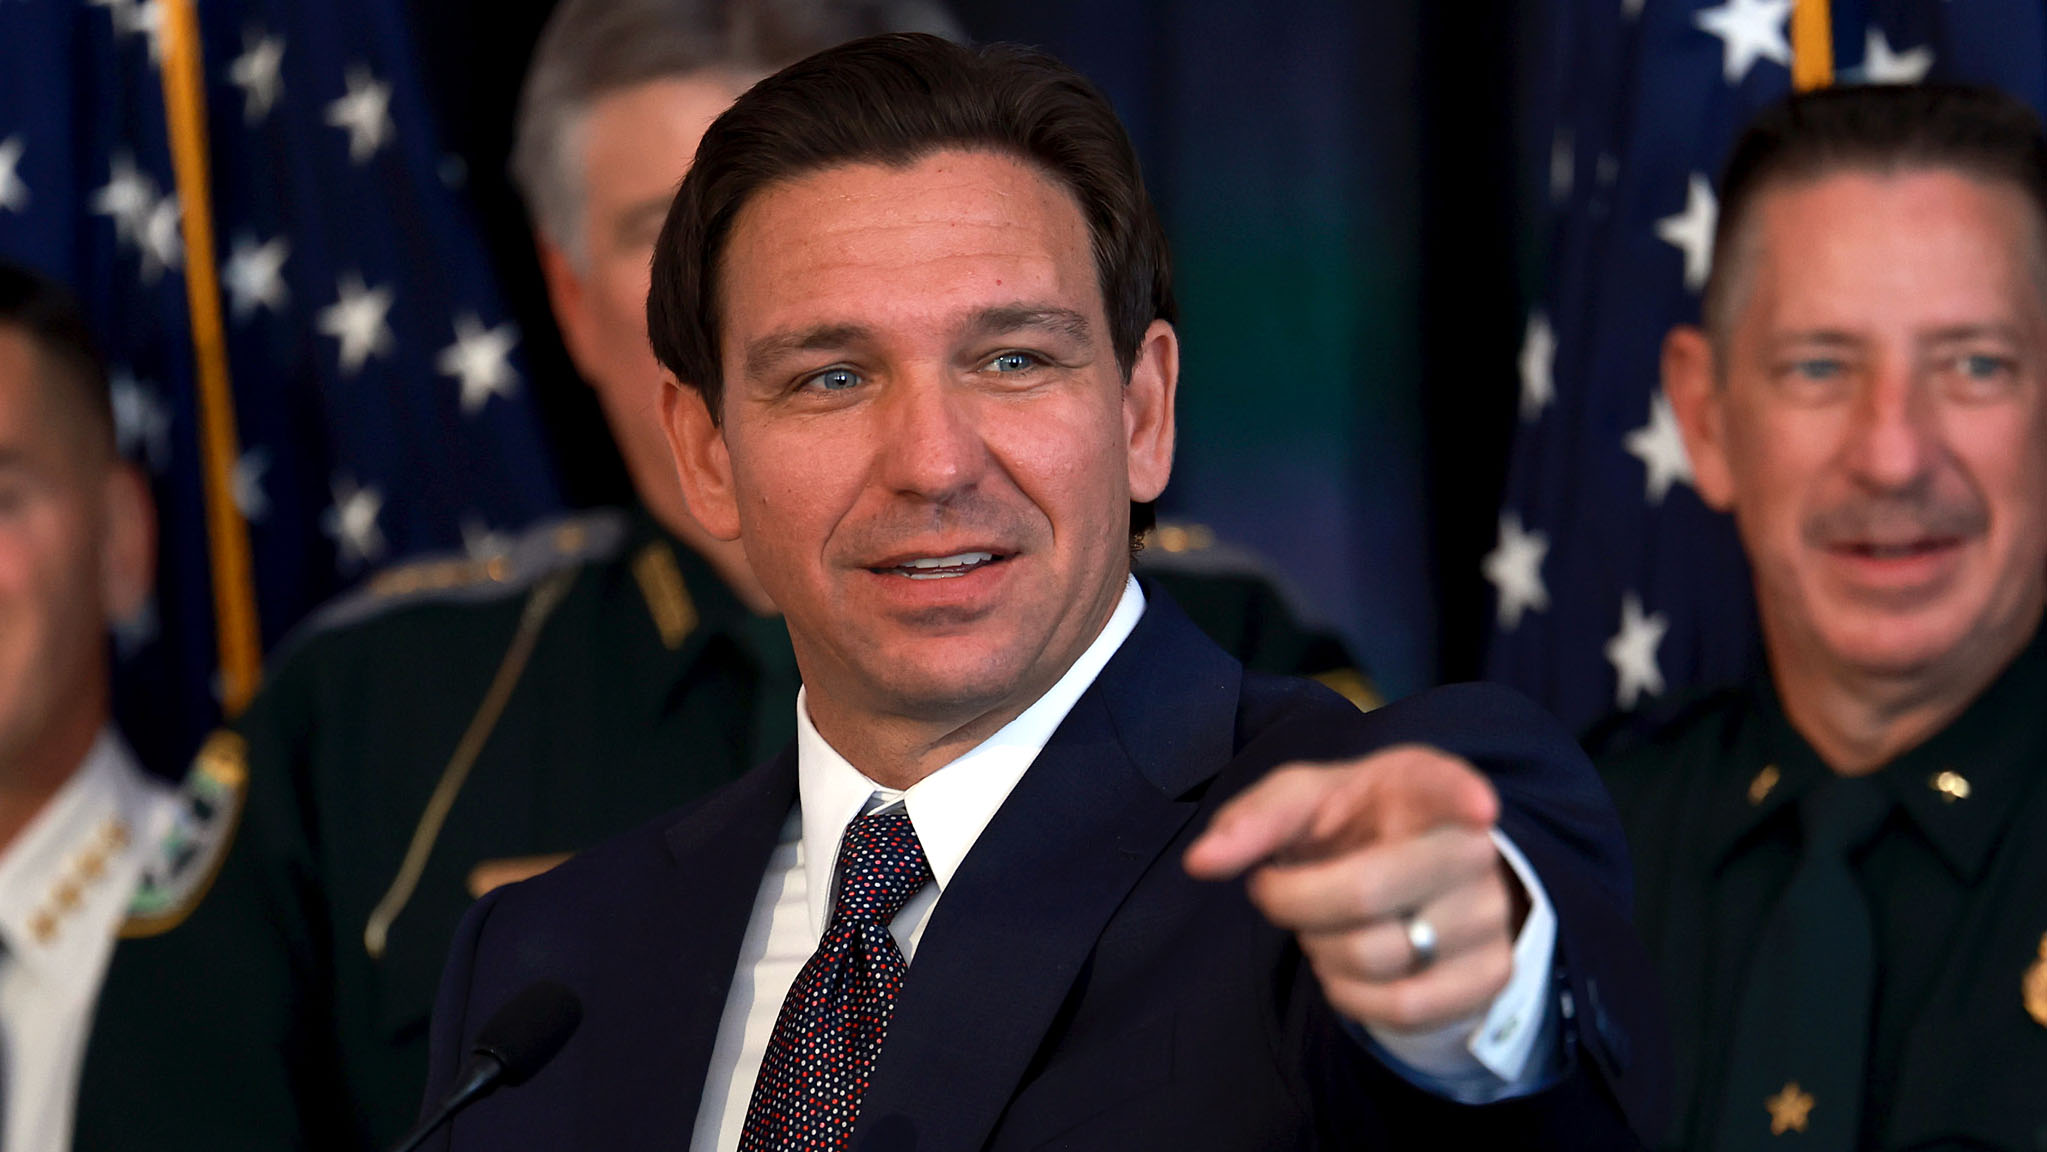 DeSantis Defends MAGA After Clinton Calls For ‘Deprogramming’ Of ‘Cult’: ‘These Are Patriotic Americans’